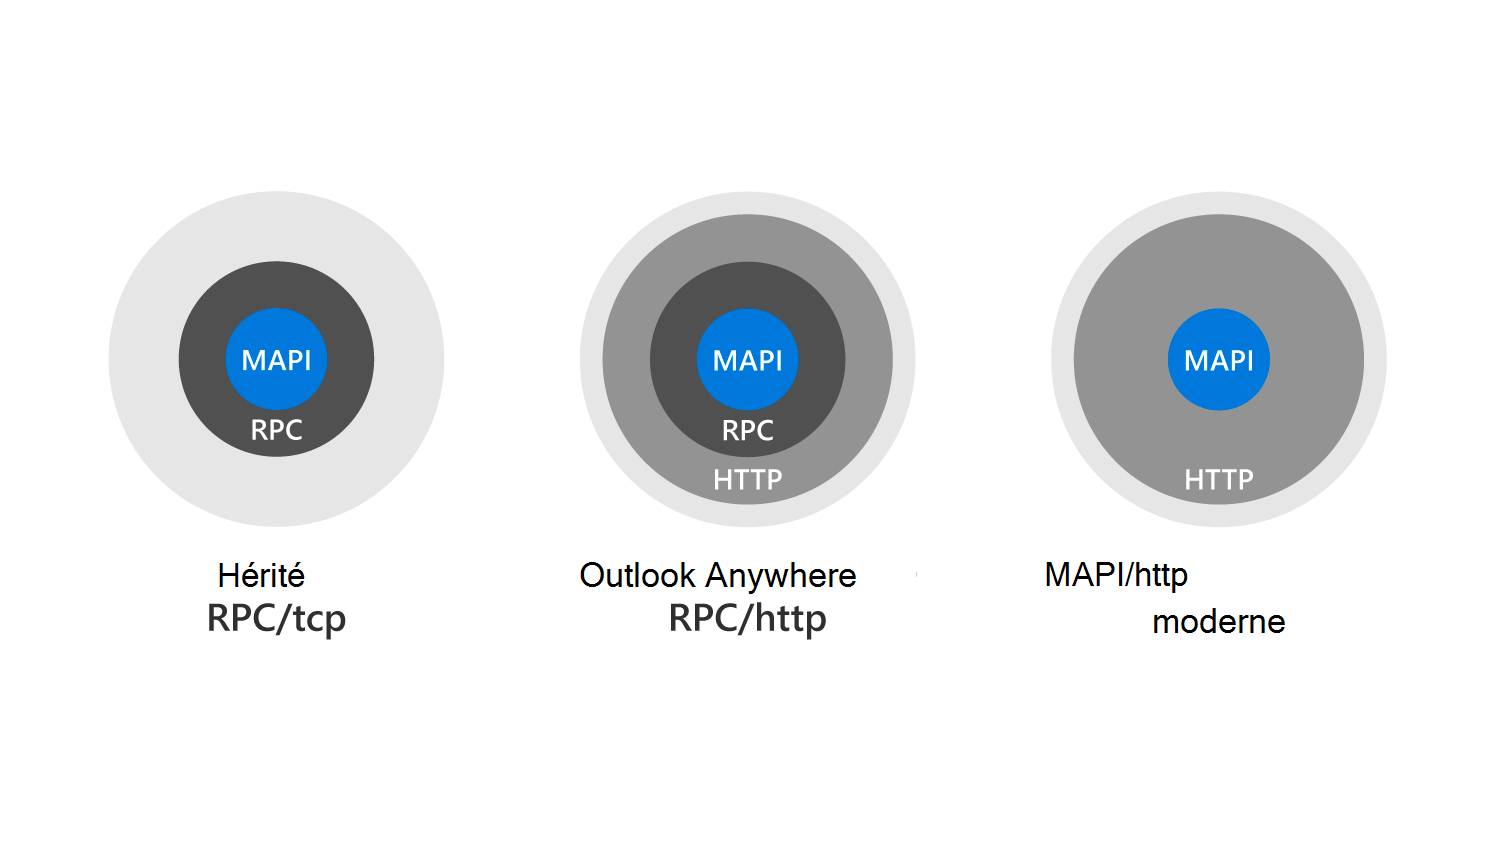 Diagram showing the progression from old to new protocols, from RPC over TCP, to RPC over HTTP, to MAPI over HTTP.